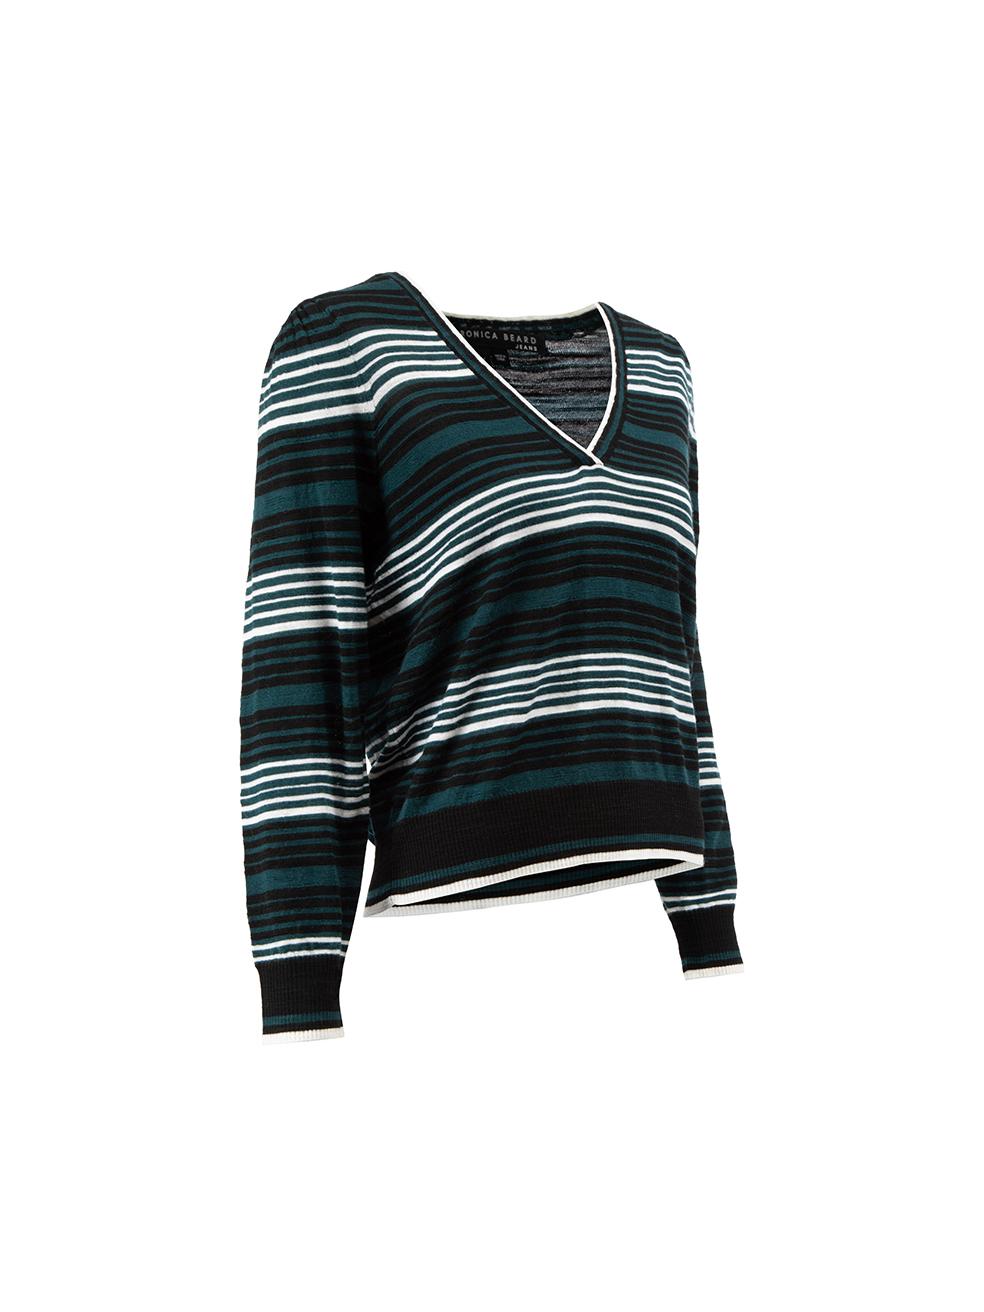 CONDITION is Very good. Hardly any visible wear to jumper is evident on this used Veronica Beard designer resale item.

Details
Green
Wool
Long sleeves jumper
Knitted
Striped pattern
V neckline
Stretchy and slightly see through
Cropped length
Made